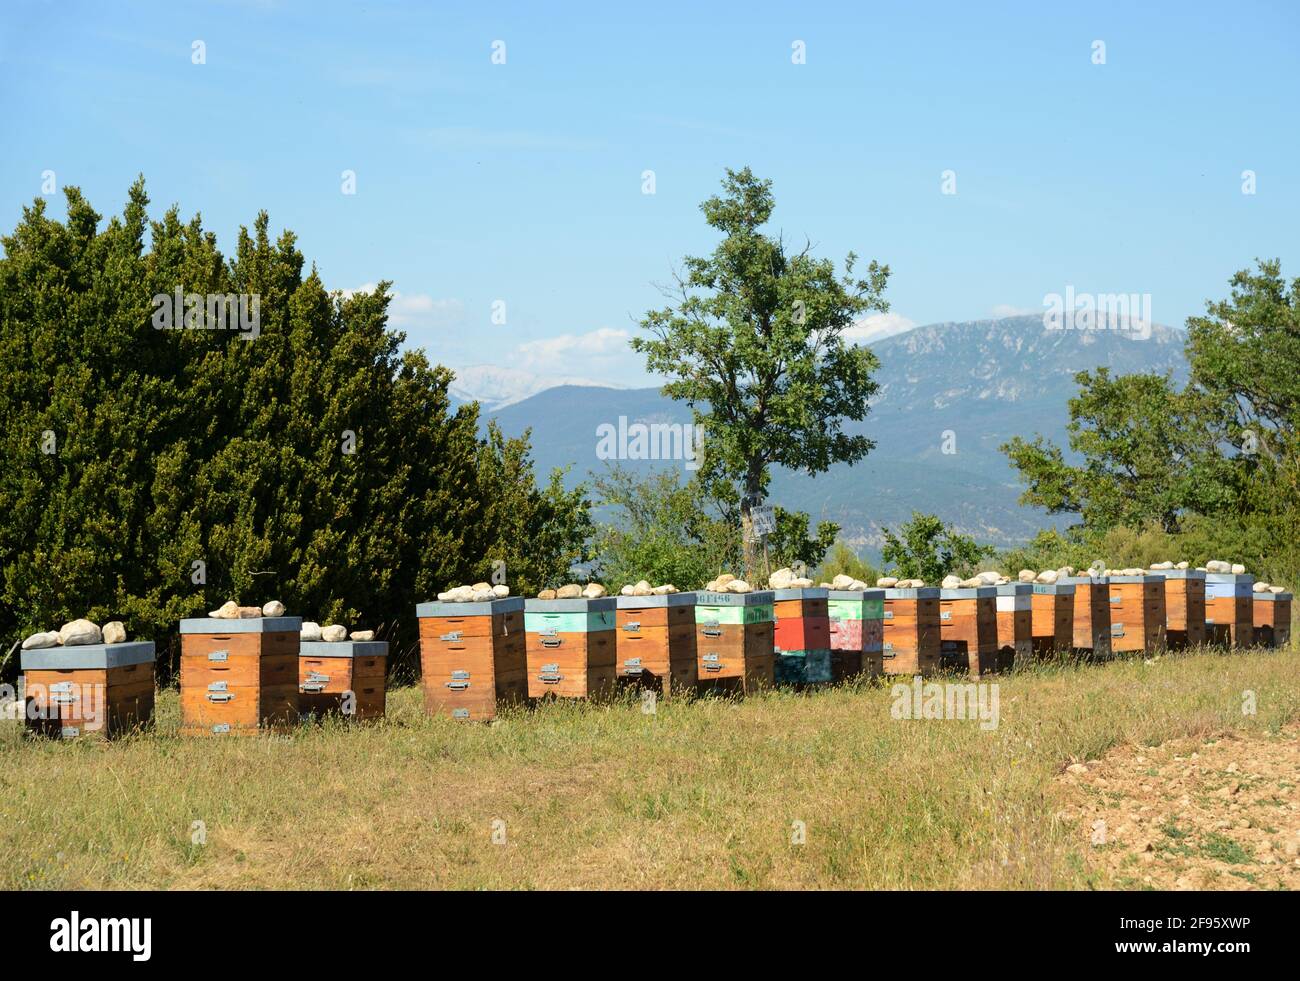 Apiculture, Beekeeping or Line or Row of Beehives for Producing Lavender Honey on the Valensole Plateau Alpes-de-Haute-Provence Provence France Stock Photo